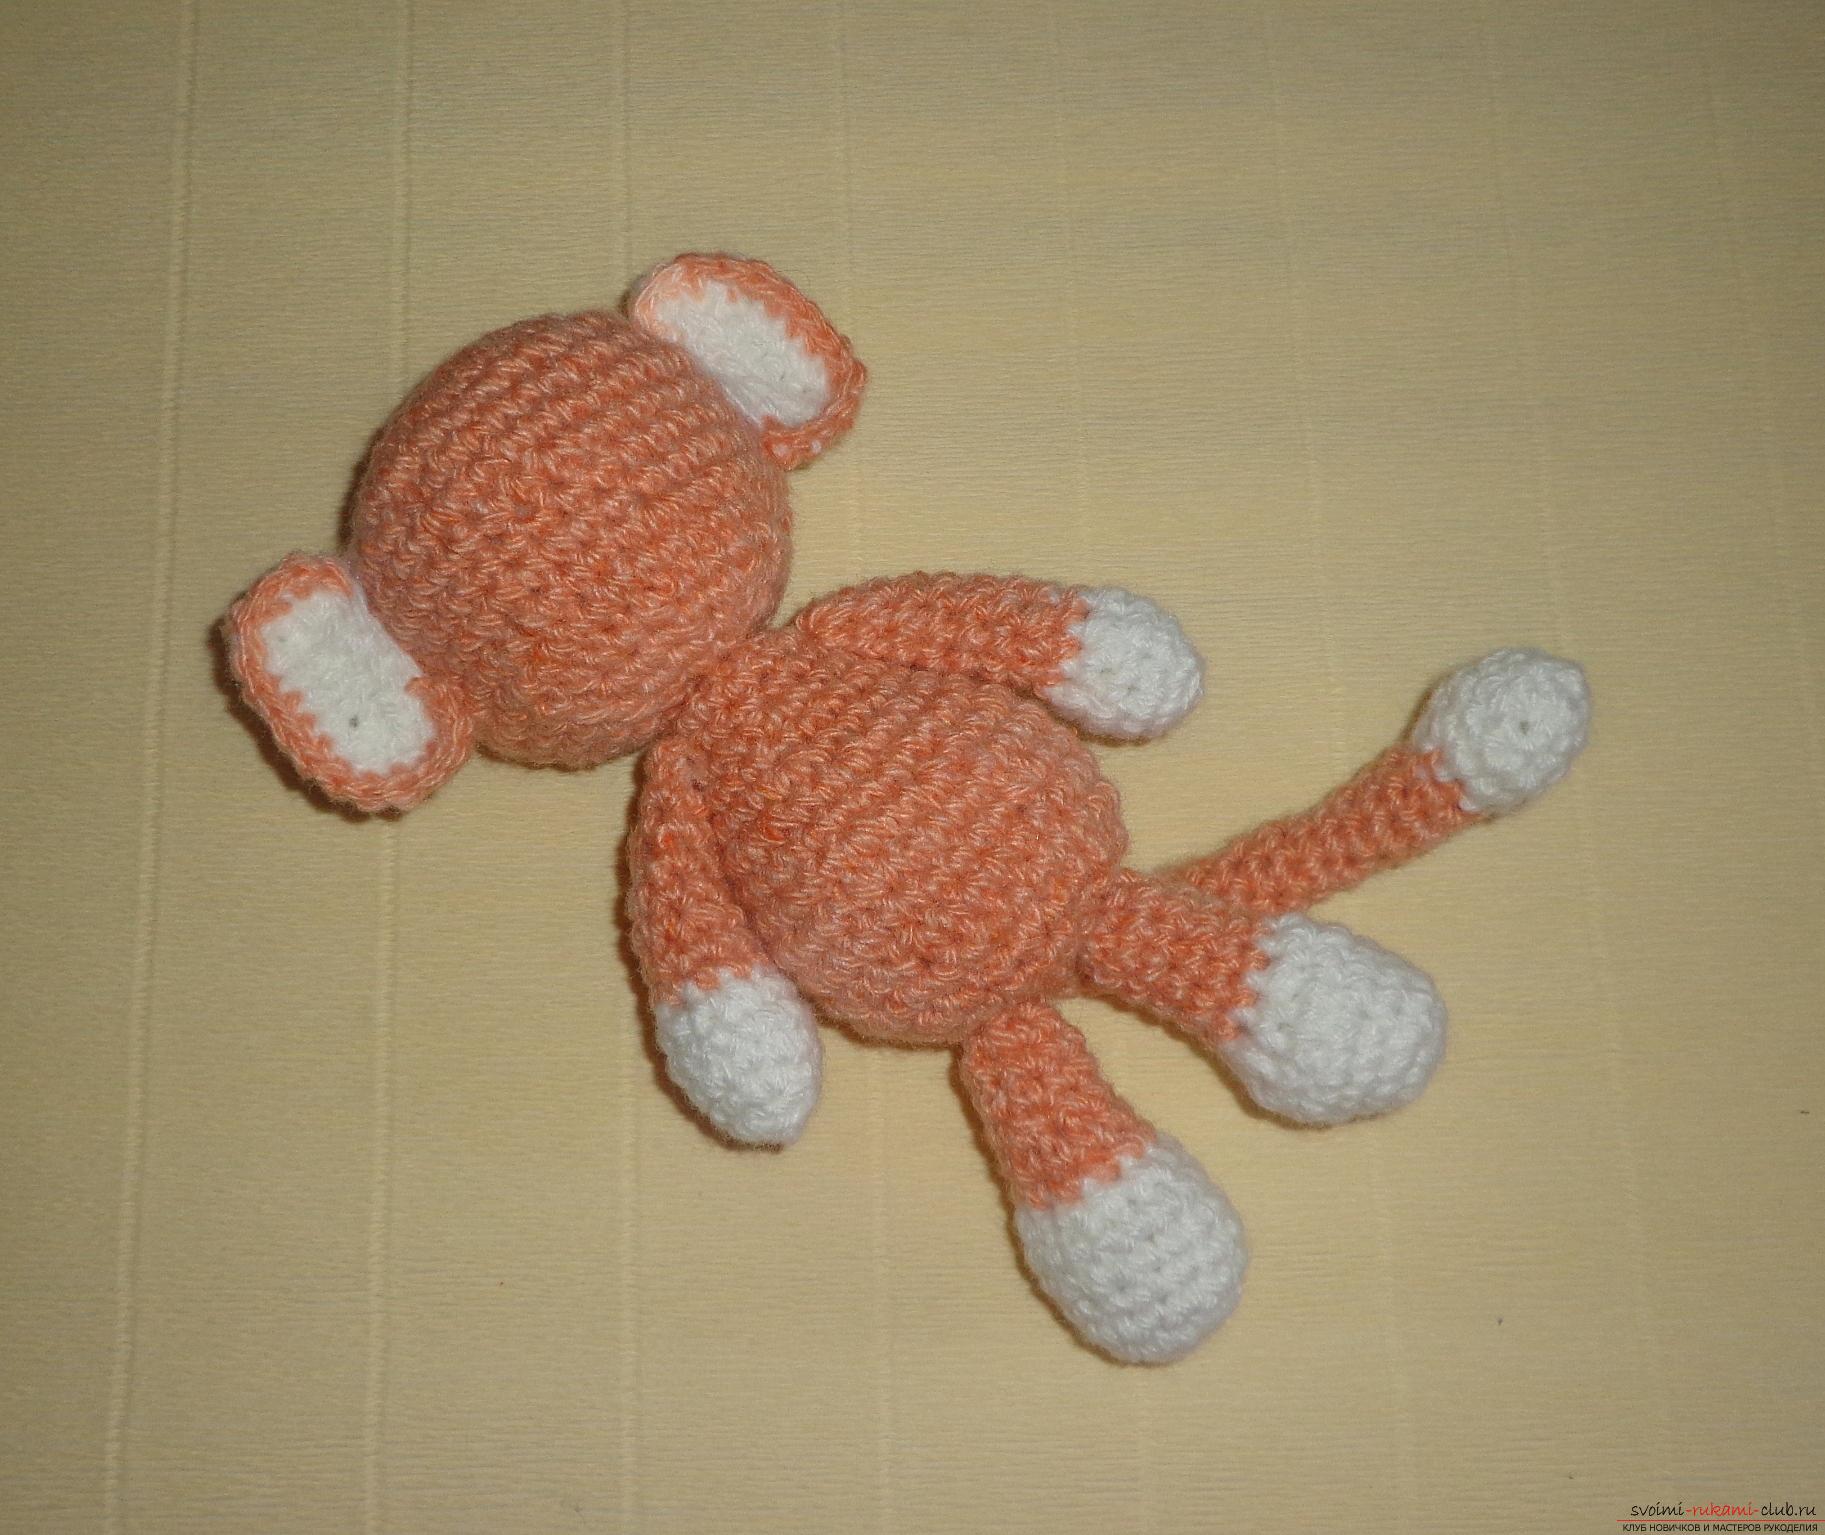 A detailed master-class of crochet crochet New Year's crafts in 2016 - monkey. Photo Number 14